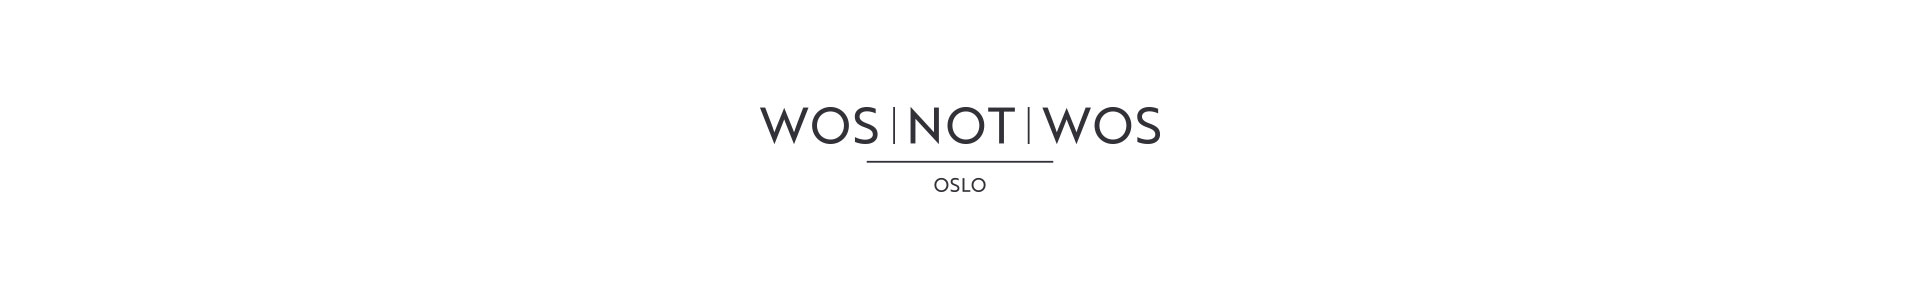 Logo Wos Not Wos